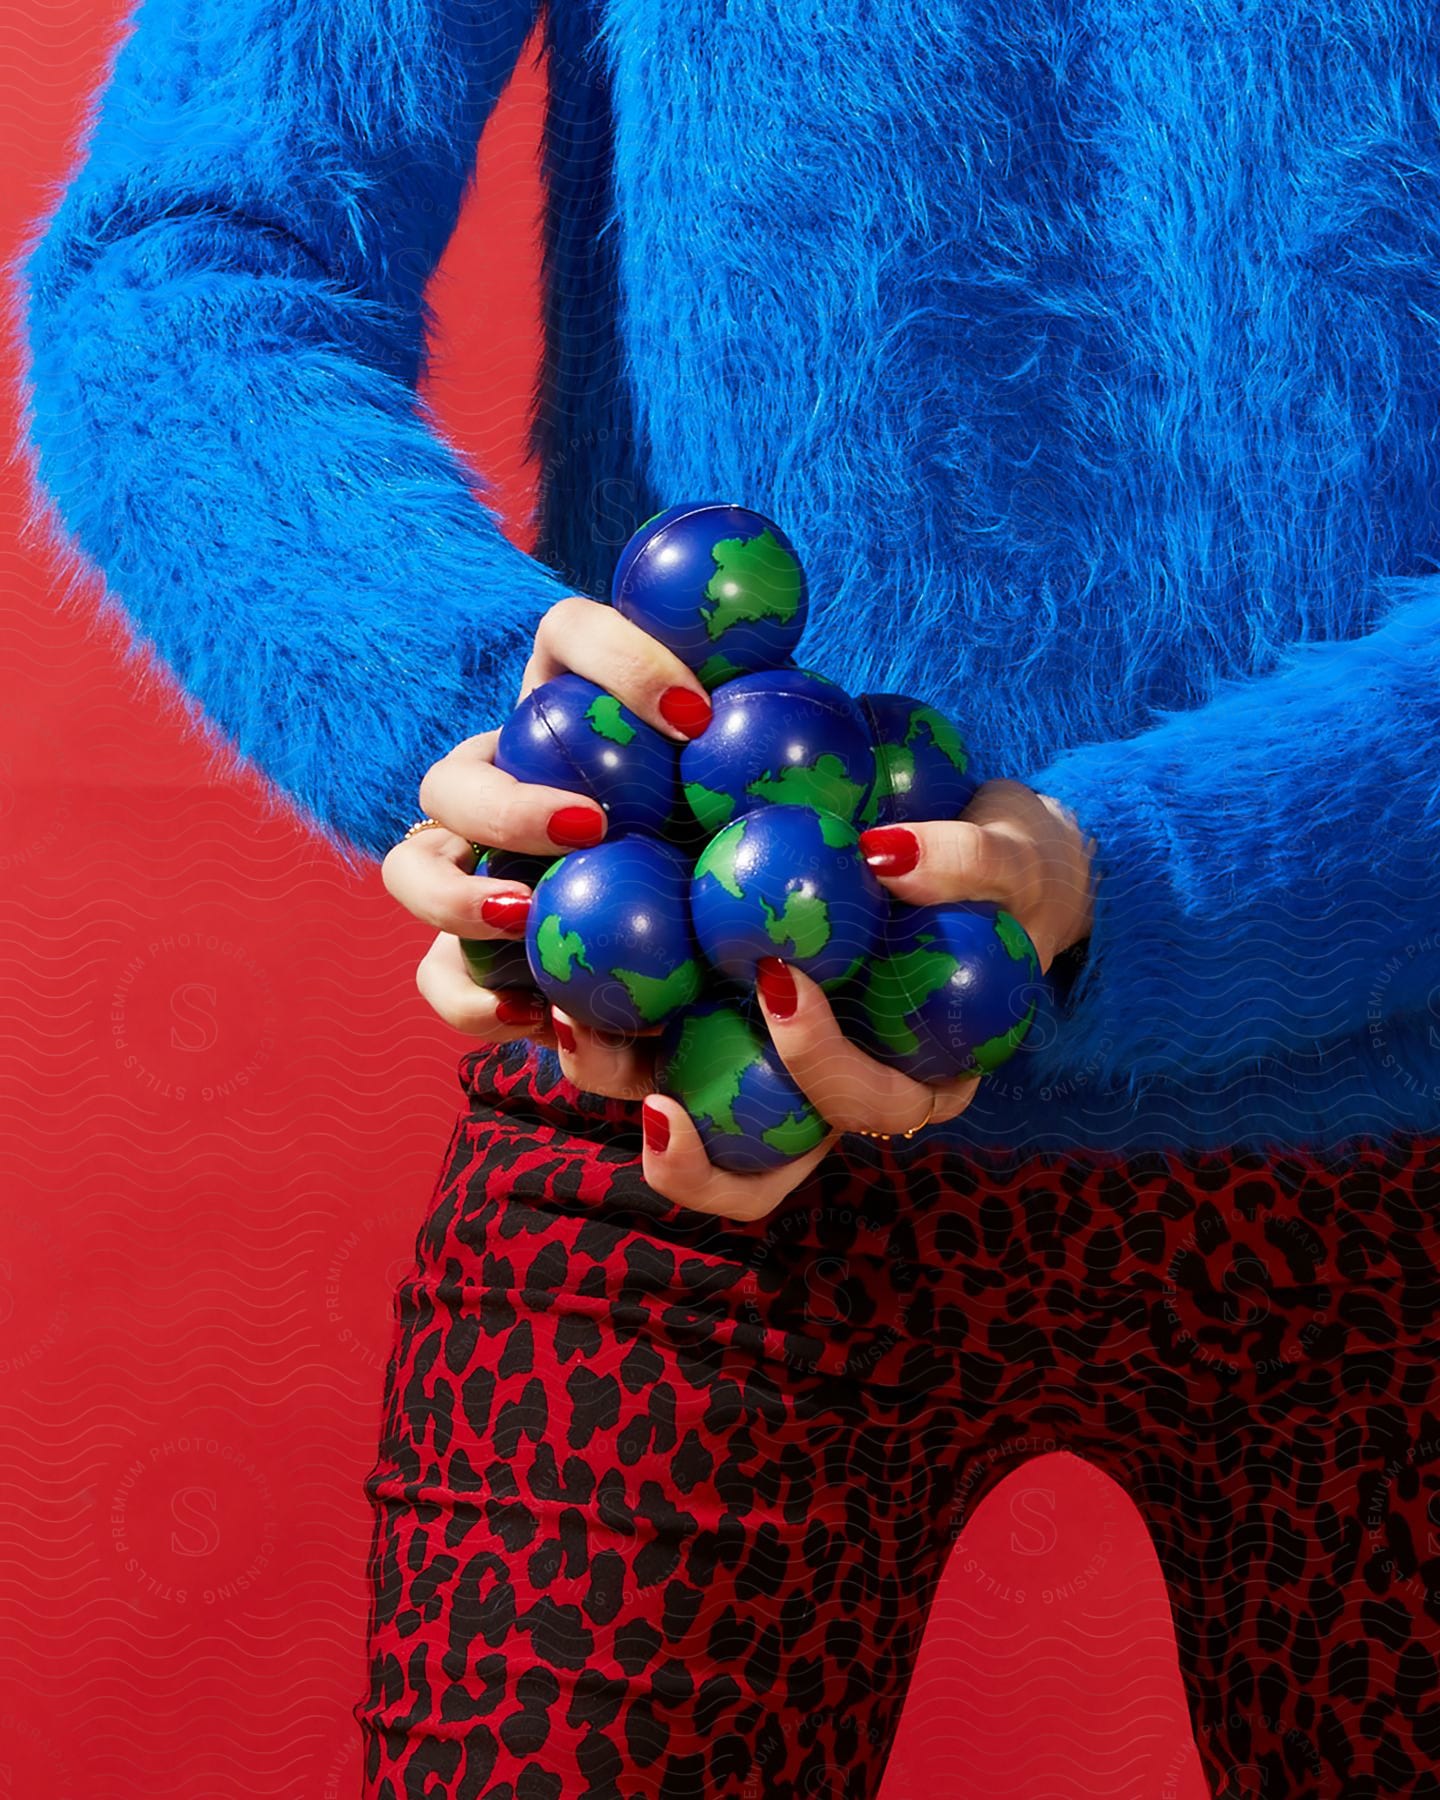 A person holding some toy spheres in their hands while wearing a blue sweater.